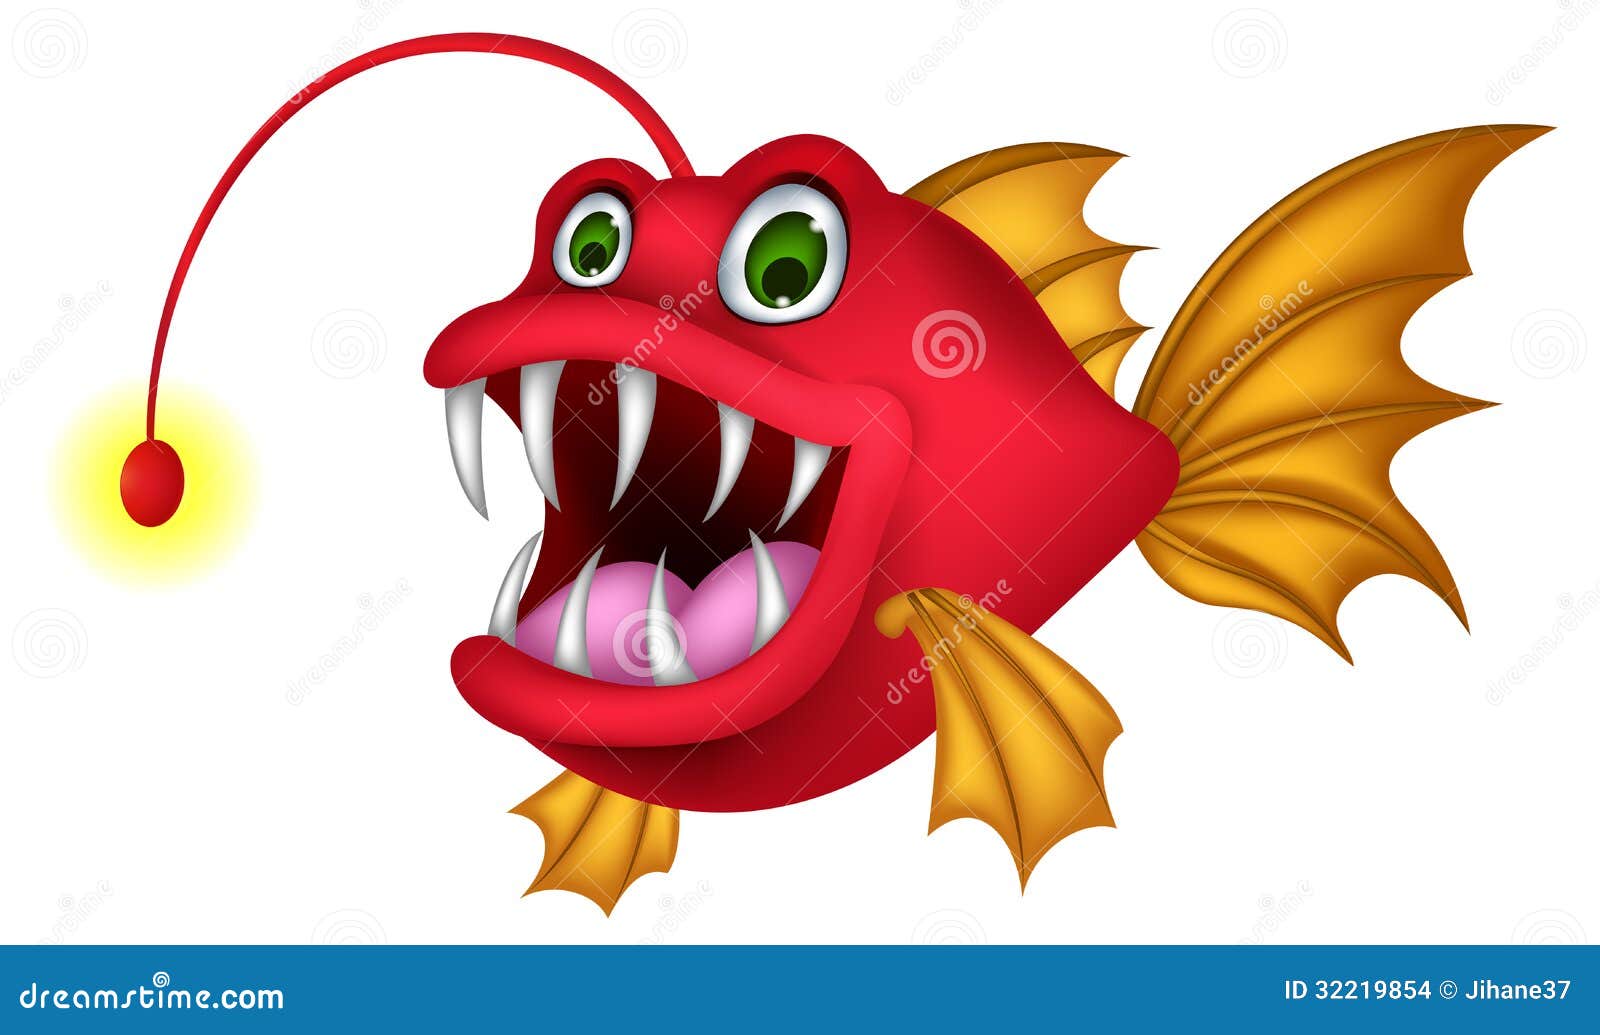 Red Monster Fish Cartoon Stock Images - Image: 32219854